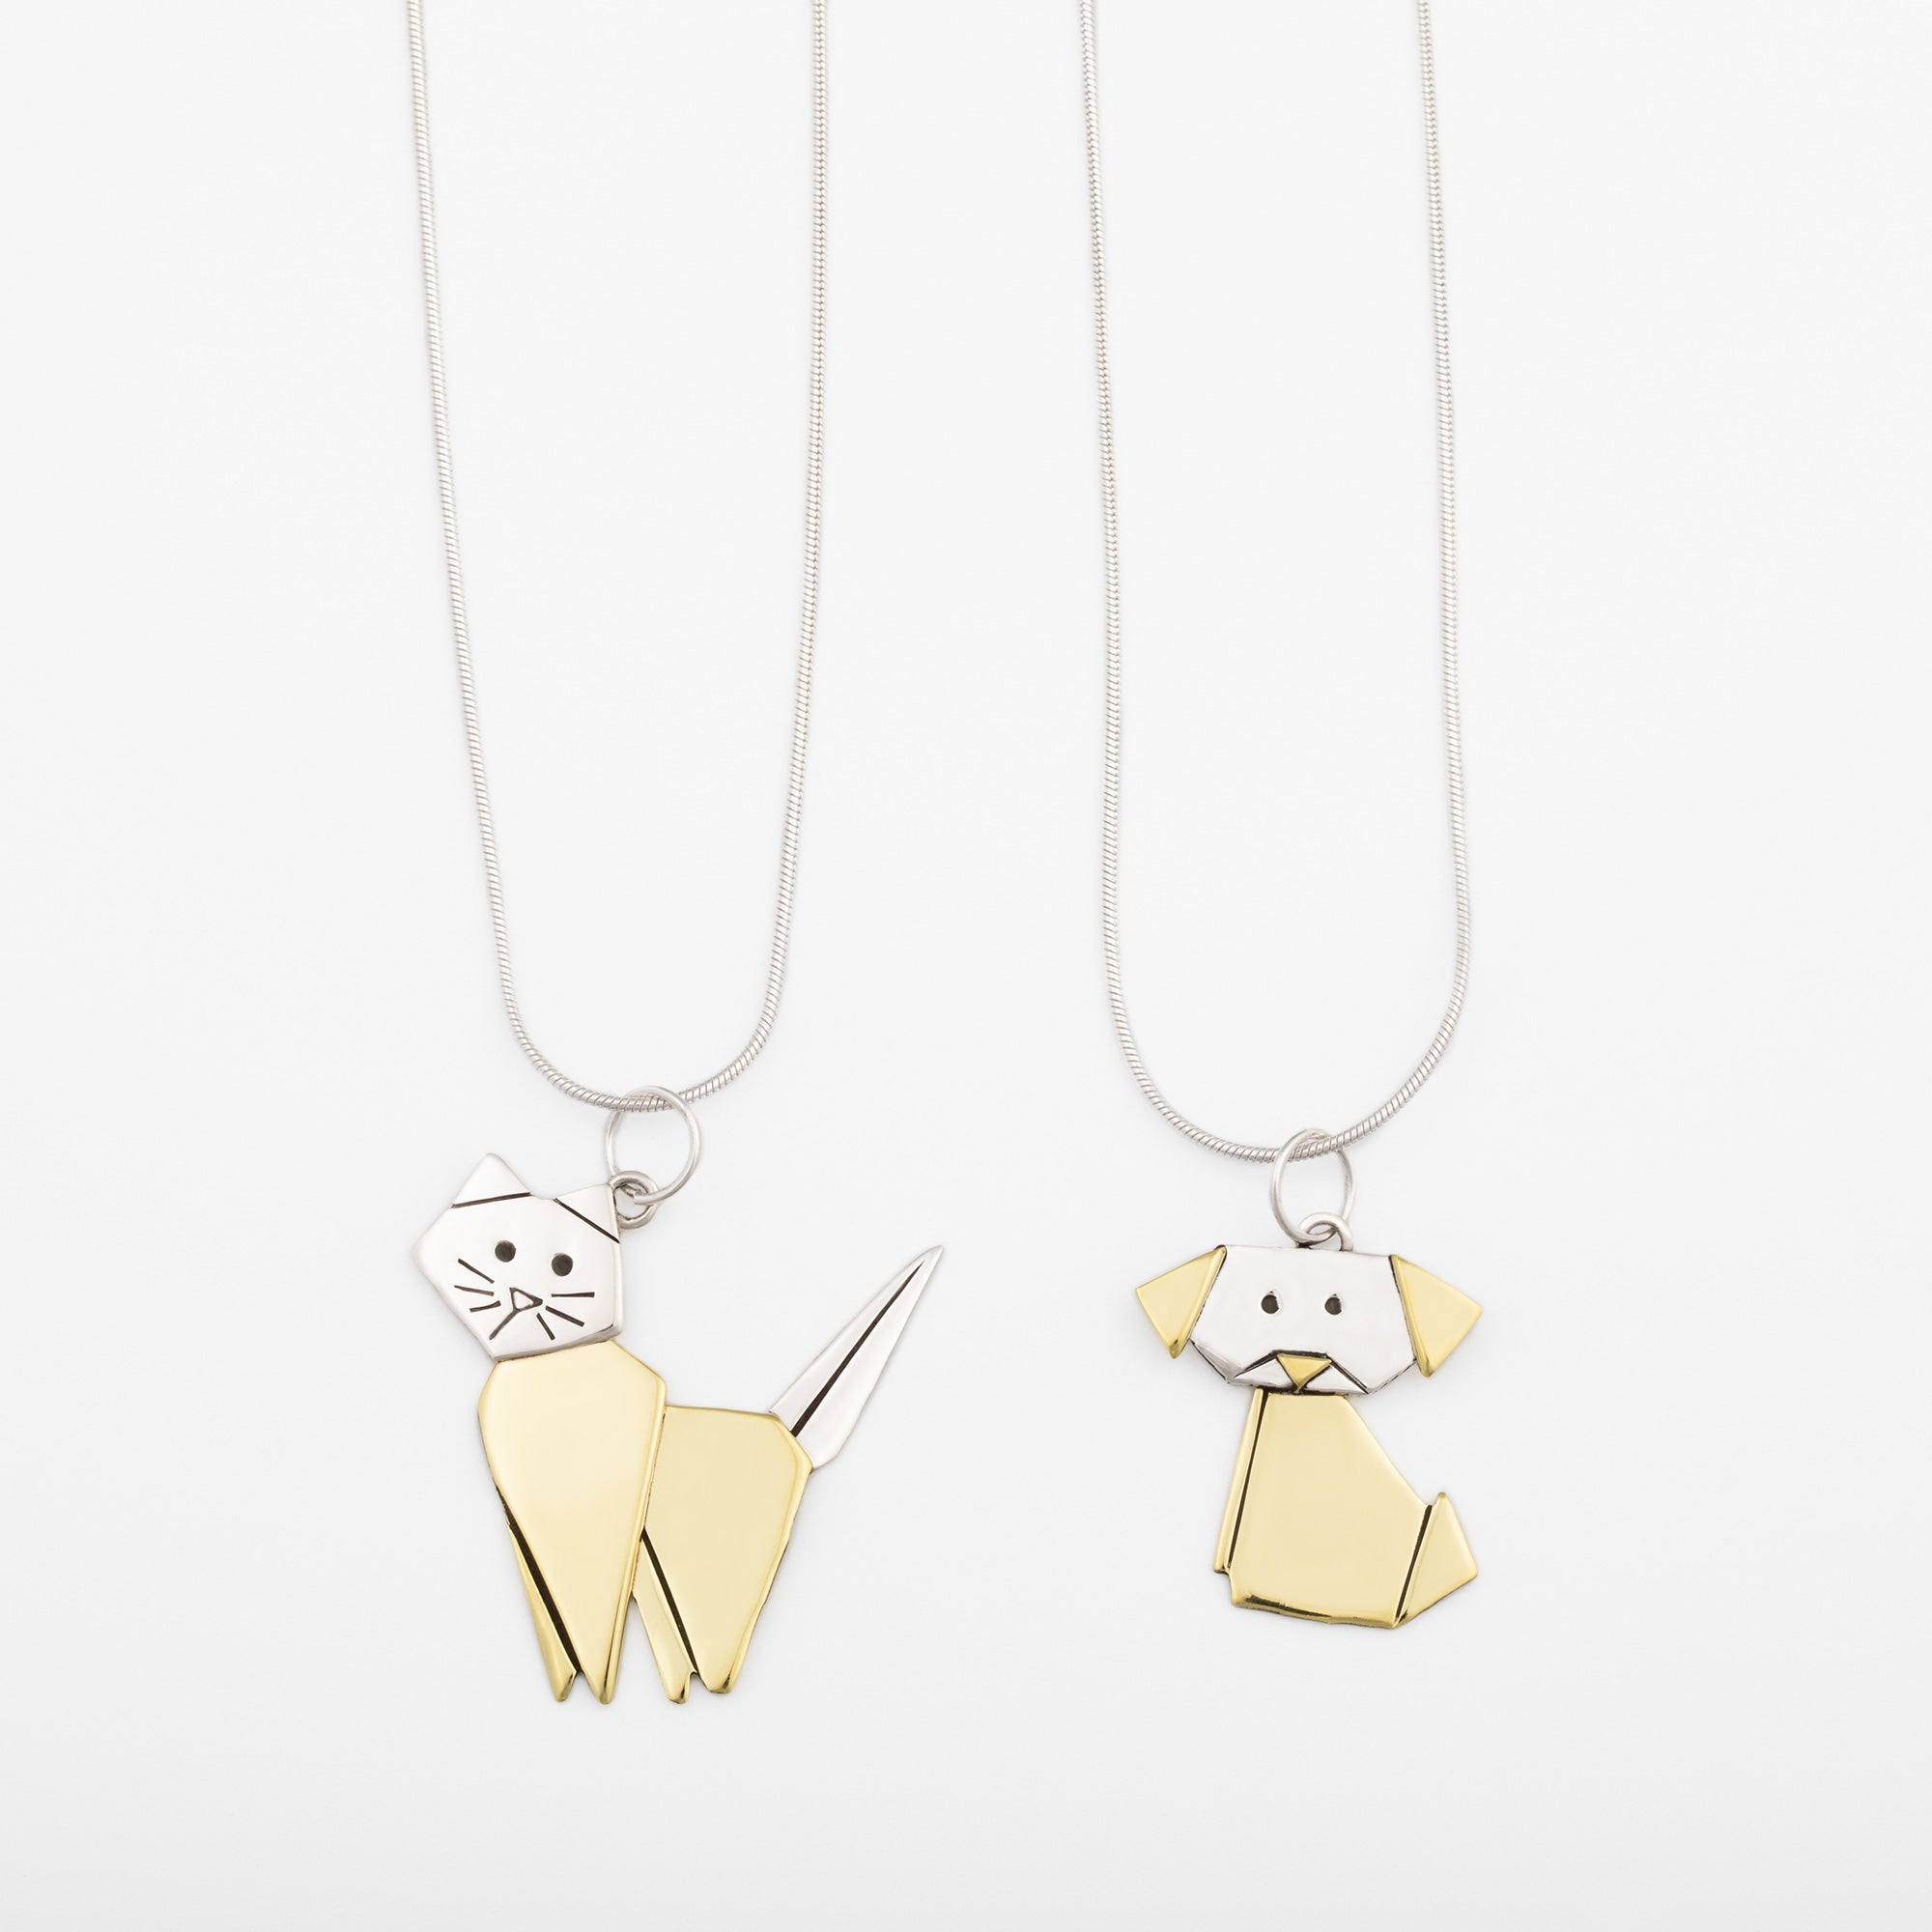 Origami Pet Necklace - Cat - With Diamond Cut Chain